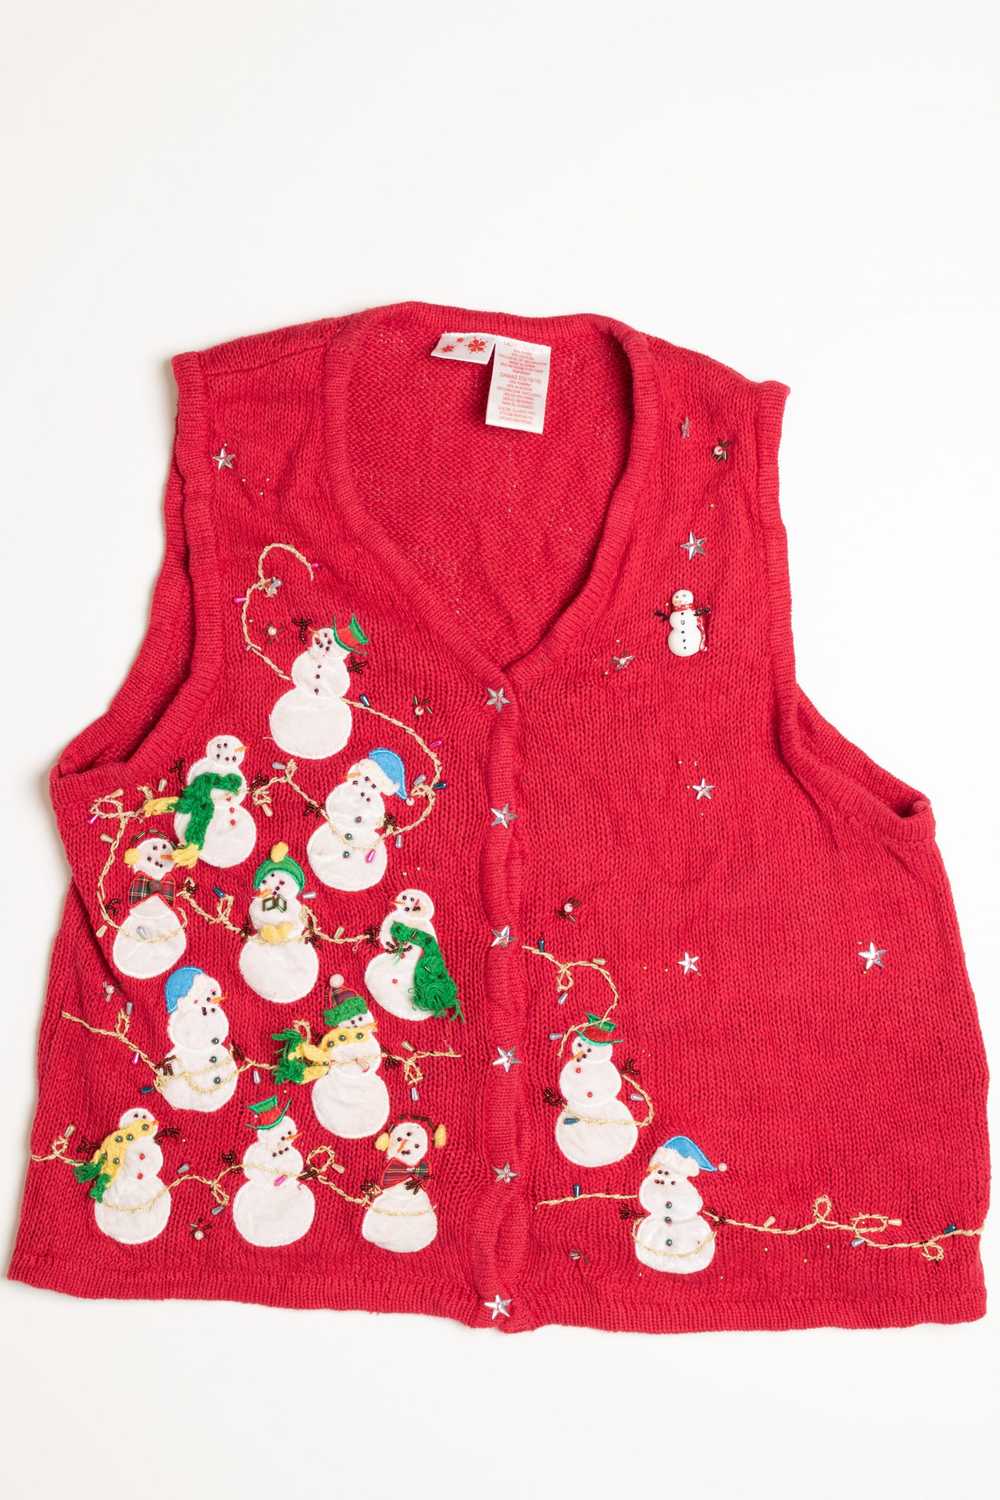 Ugly Christmas Sweater Vest 51 - image 2